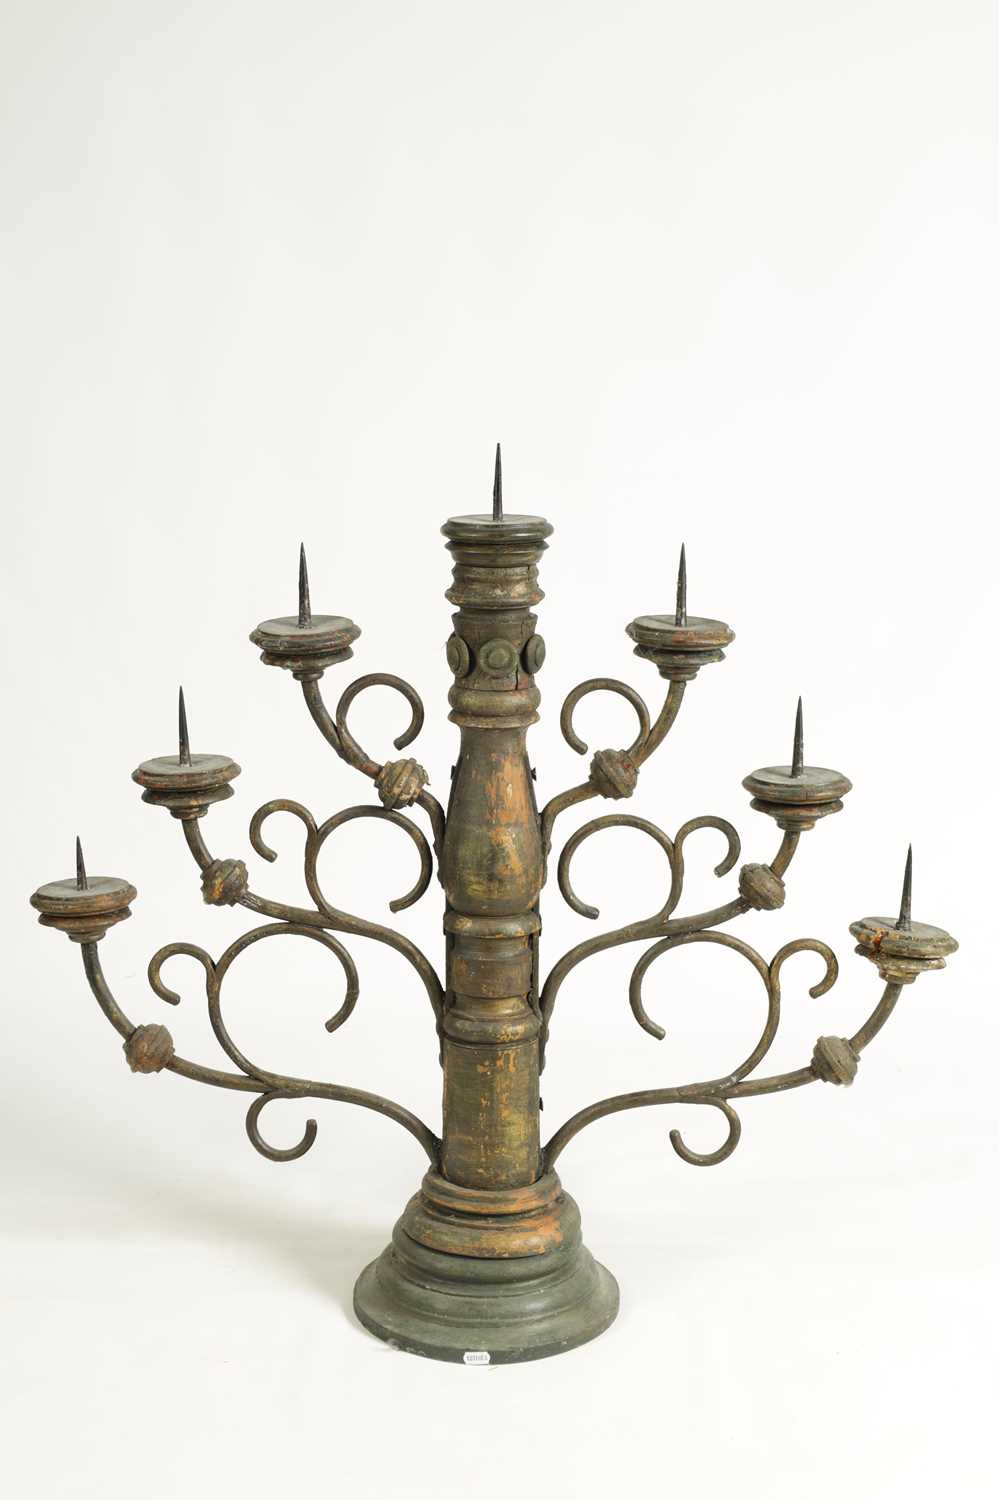 AN IMPRESSIVE 19TH CENTURY SCANDINAVIAN PAINTED PINE AND IRONWORK CANDELABRA - Image 5 of 9